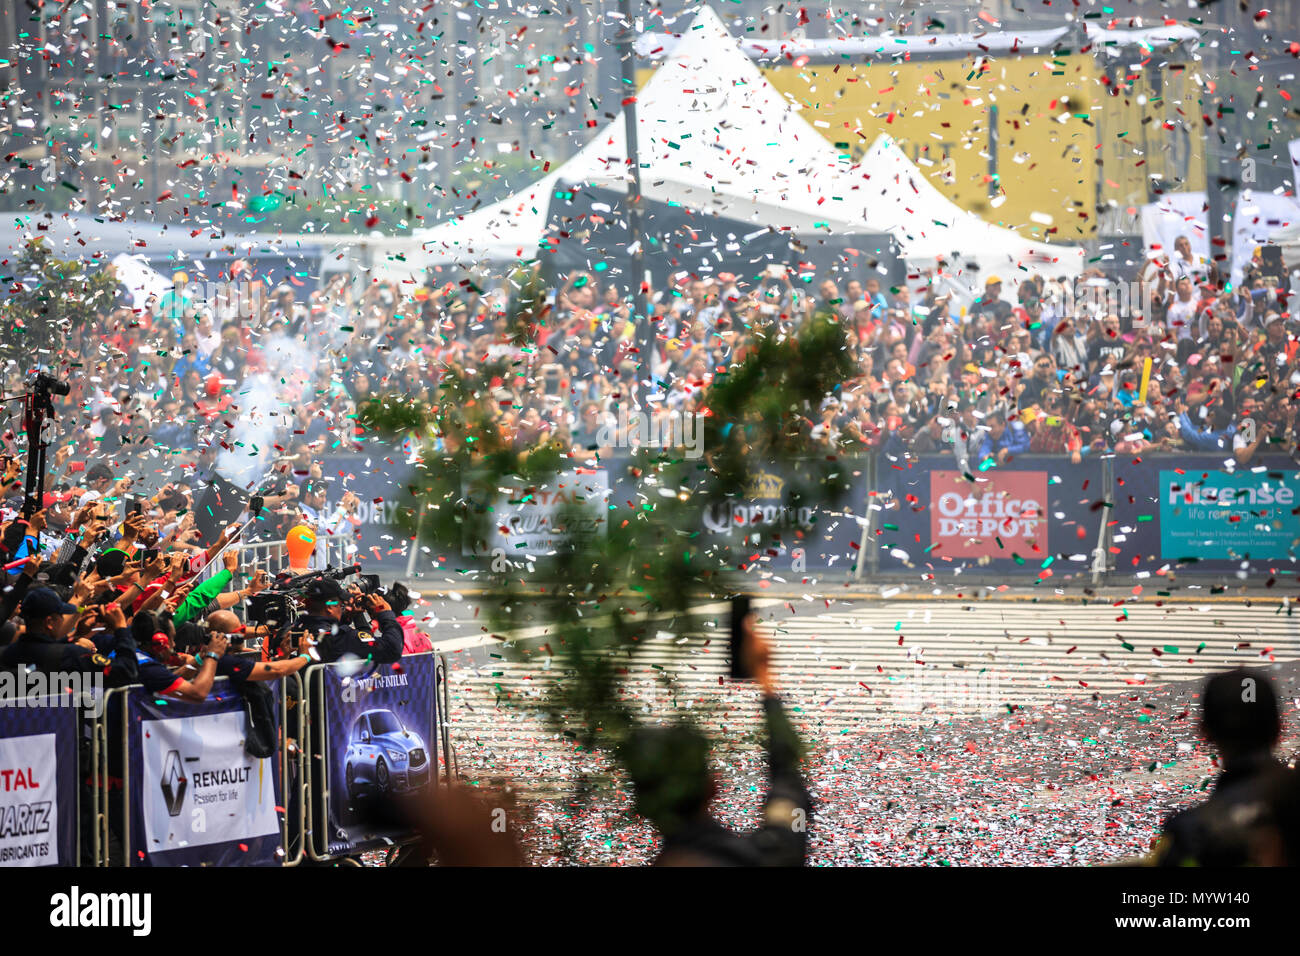 Mexico City, Mexico - June 27, 2015: Audience gone crazy watching the F1 Cars burning wheels and flying confetti, at the Infiniti Red Bull Racing F1 Showrun. Stock Photo